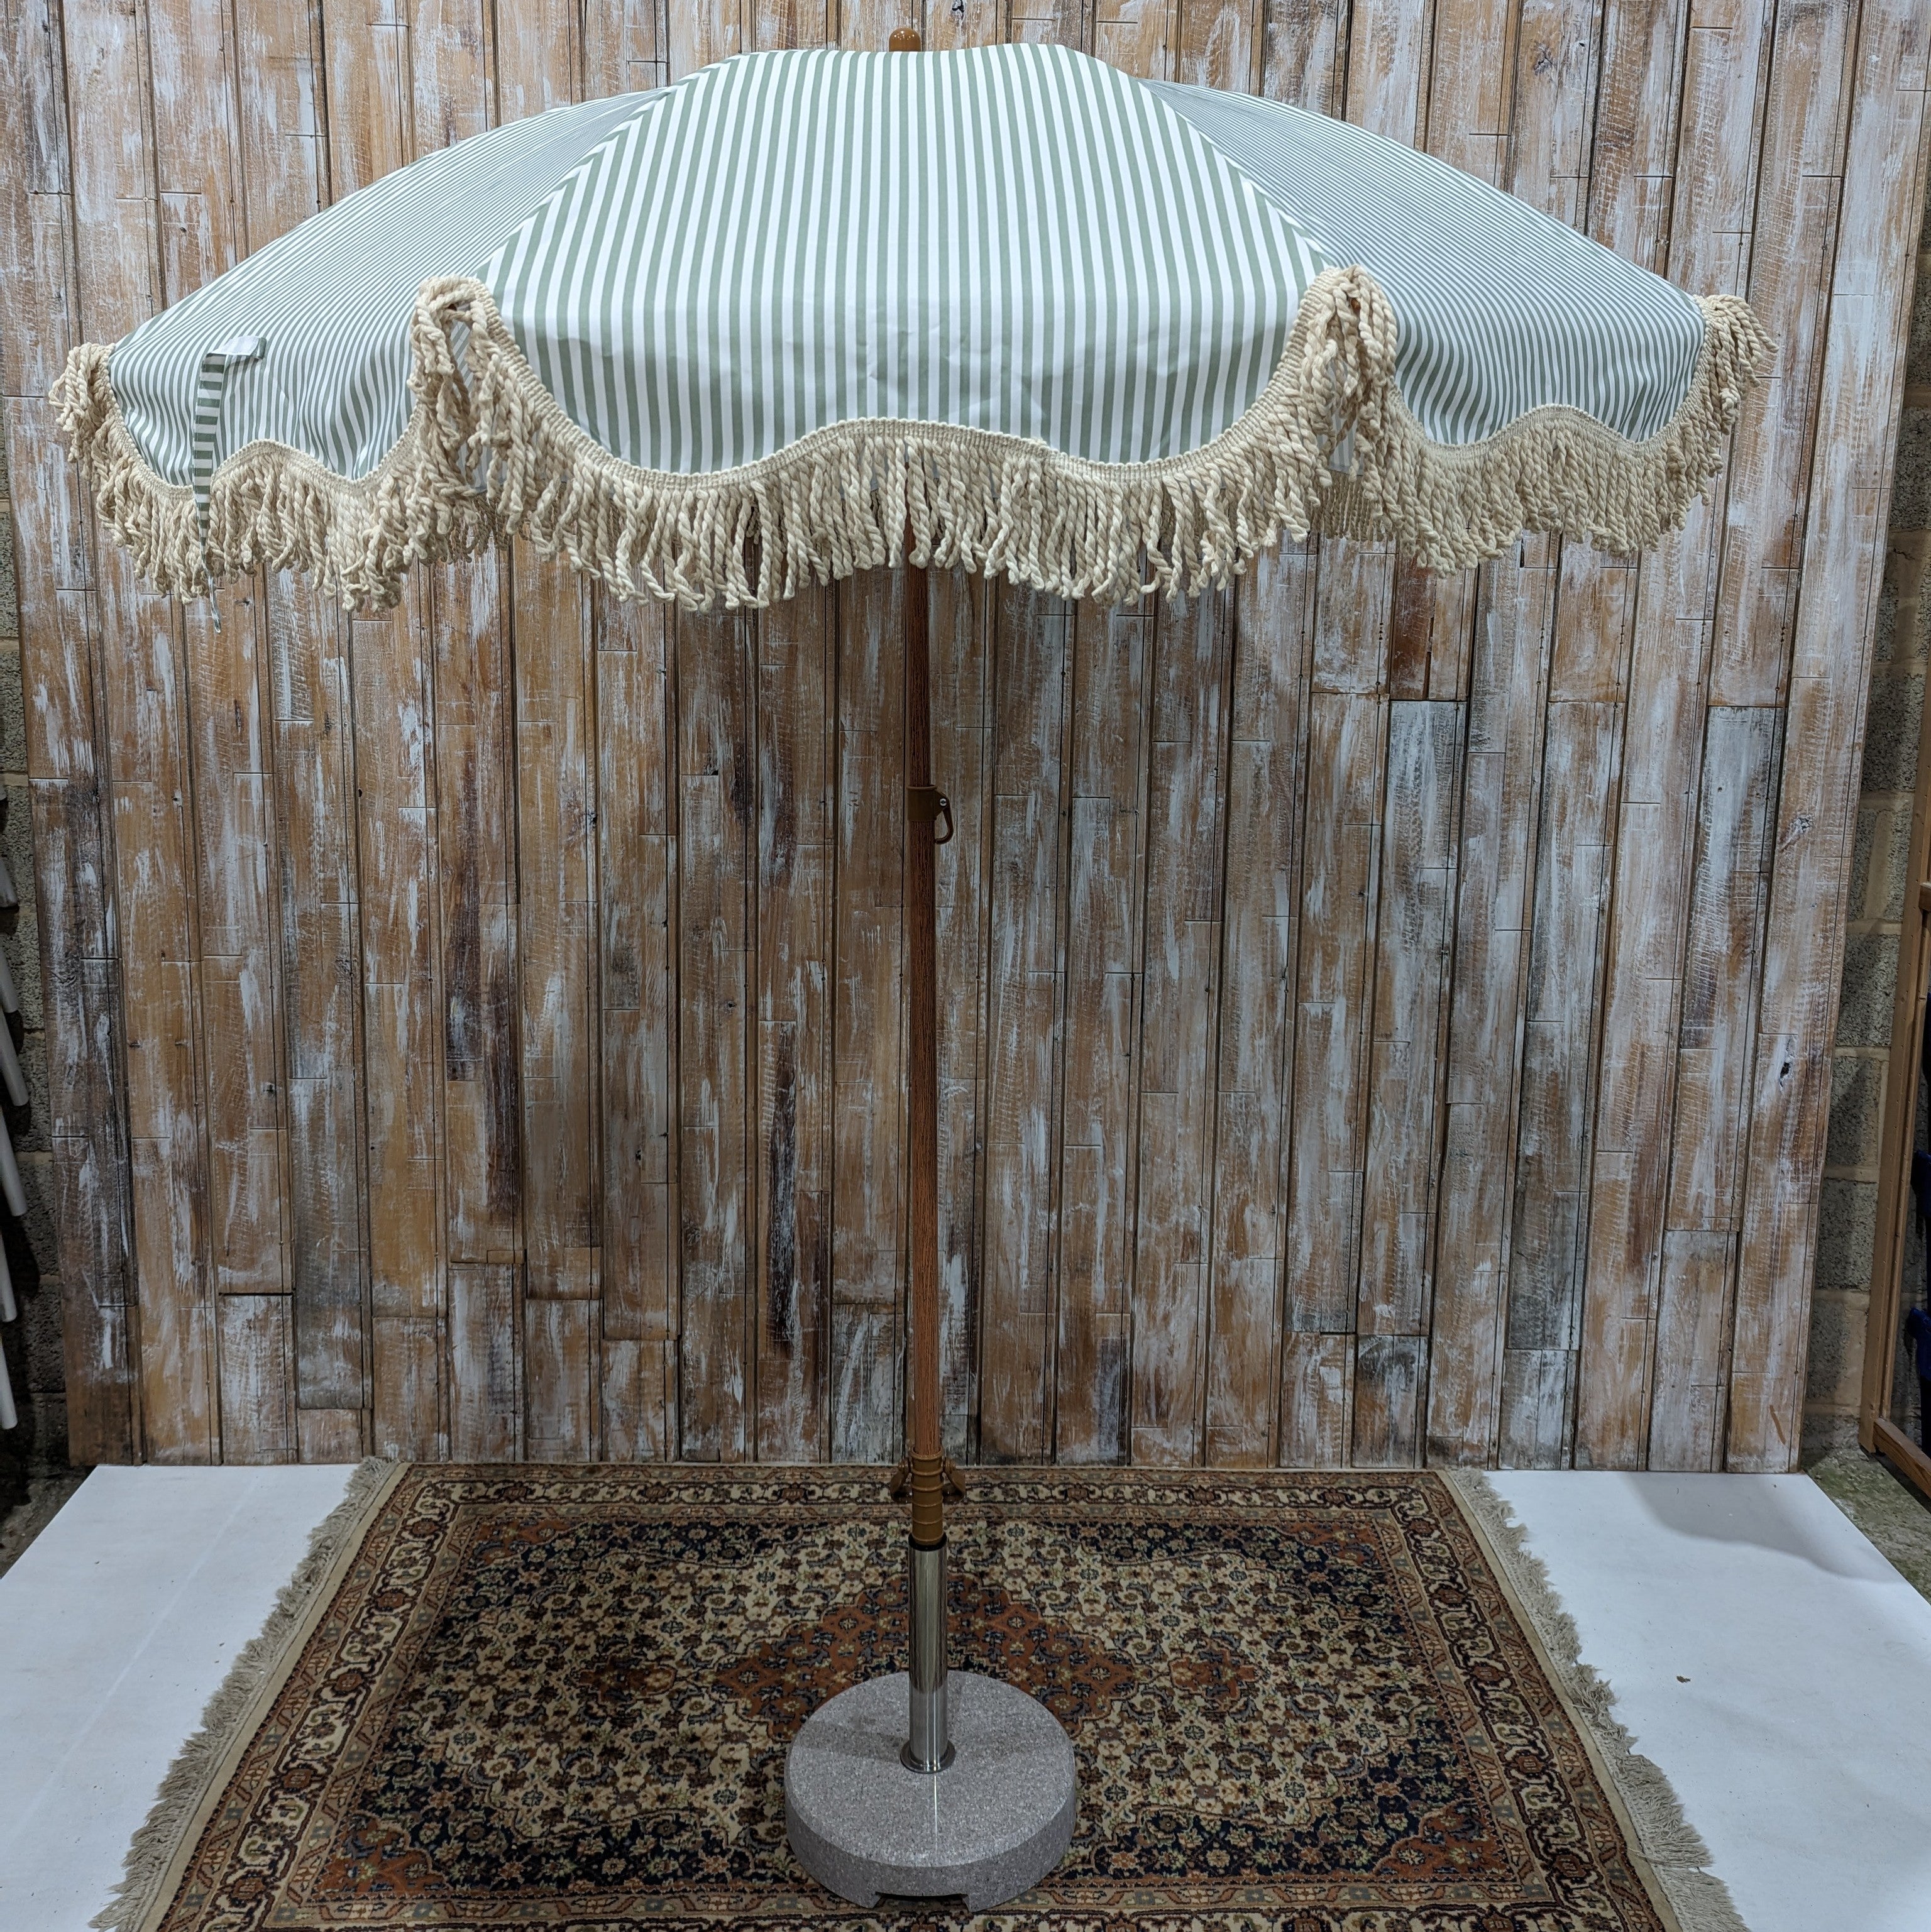 Striped Parasol With Stand